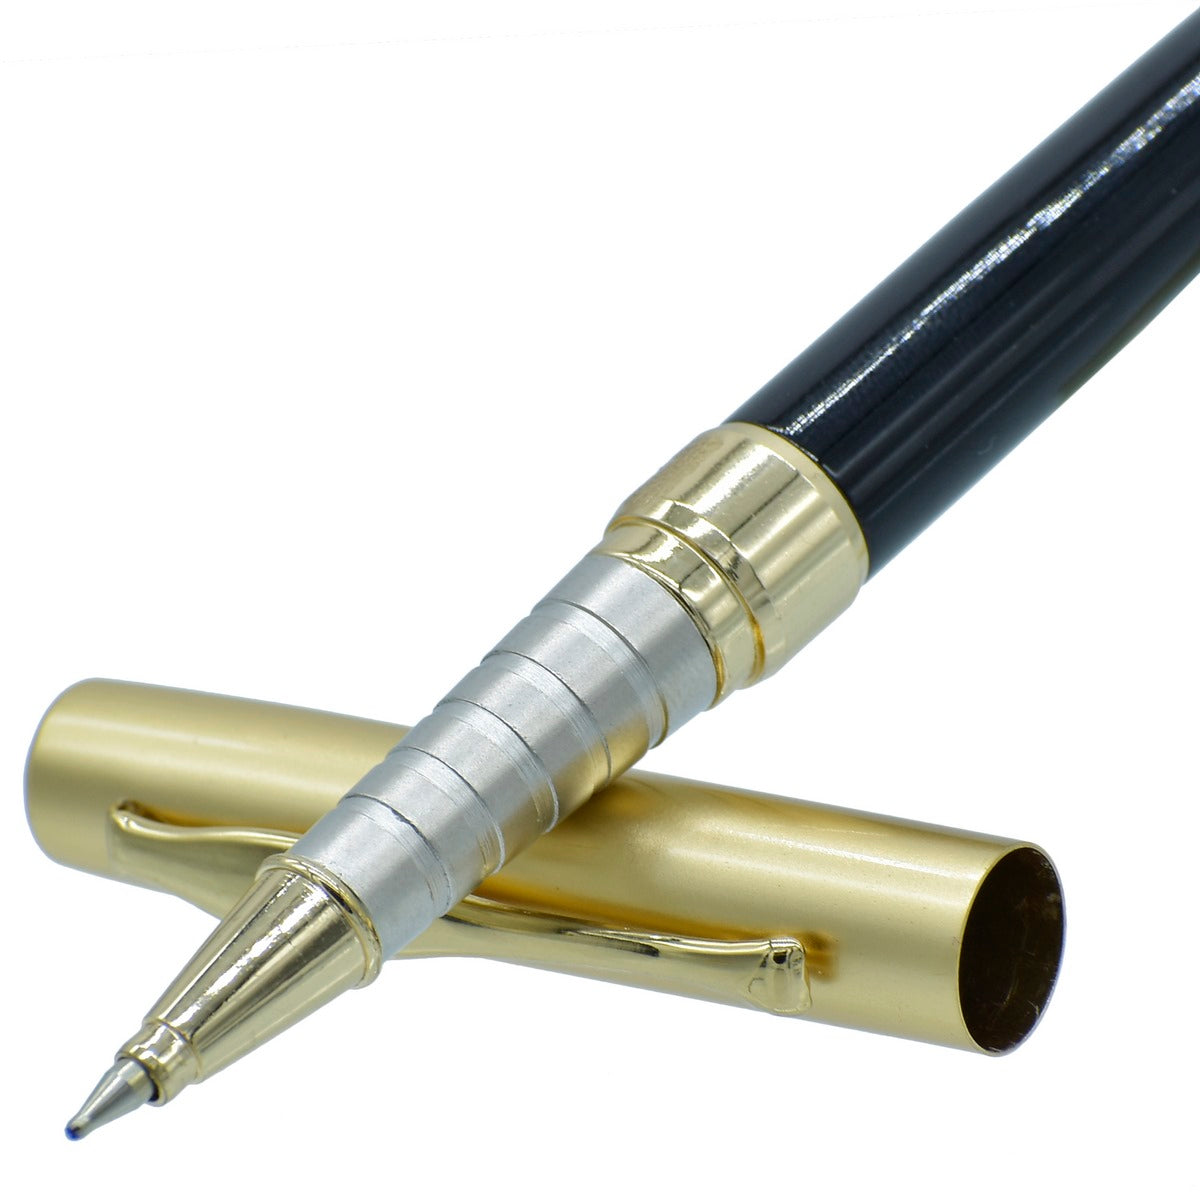 Black Color Ball Pen with Half Golden Clip - For Office, College, Personal Use - Kochi